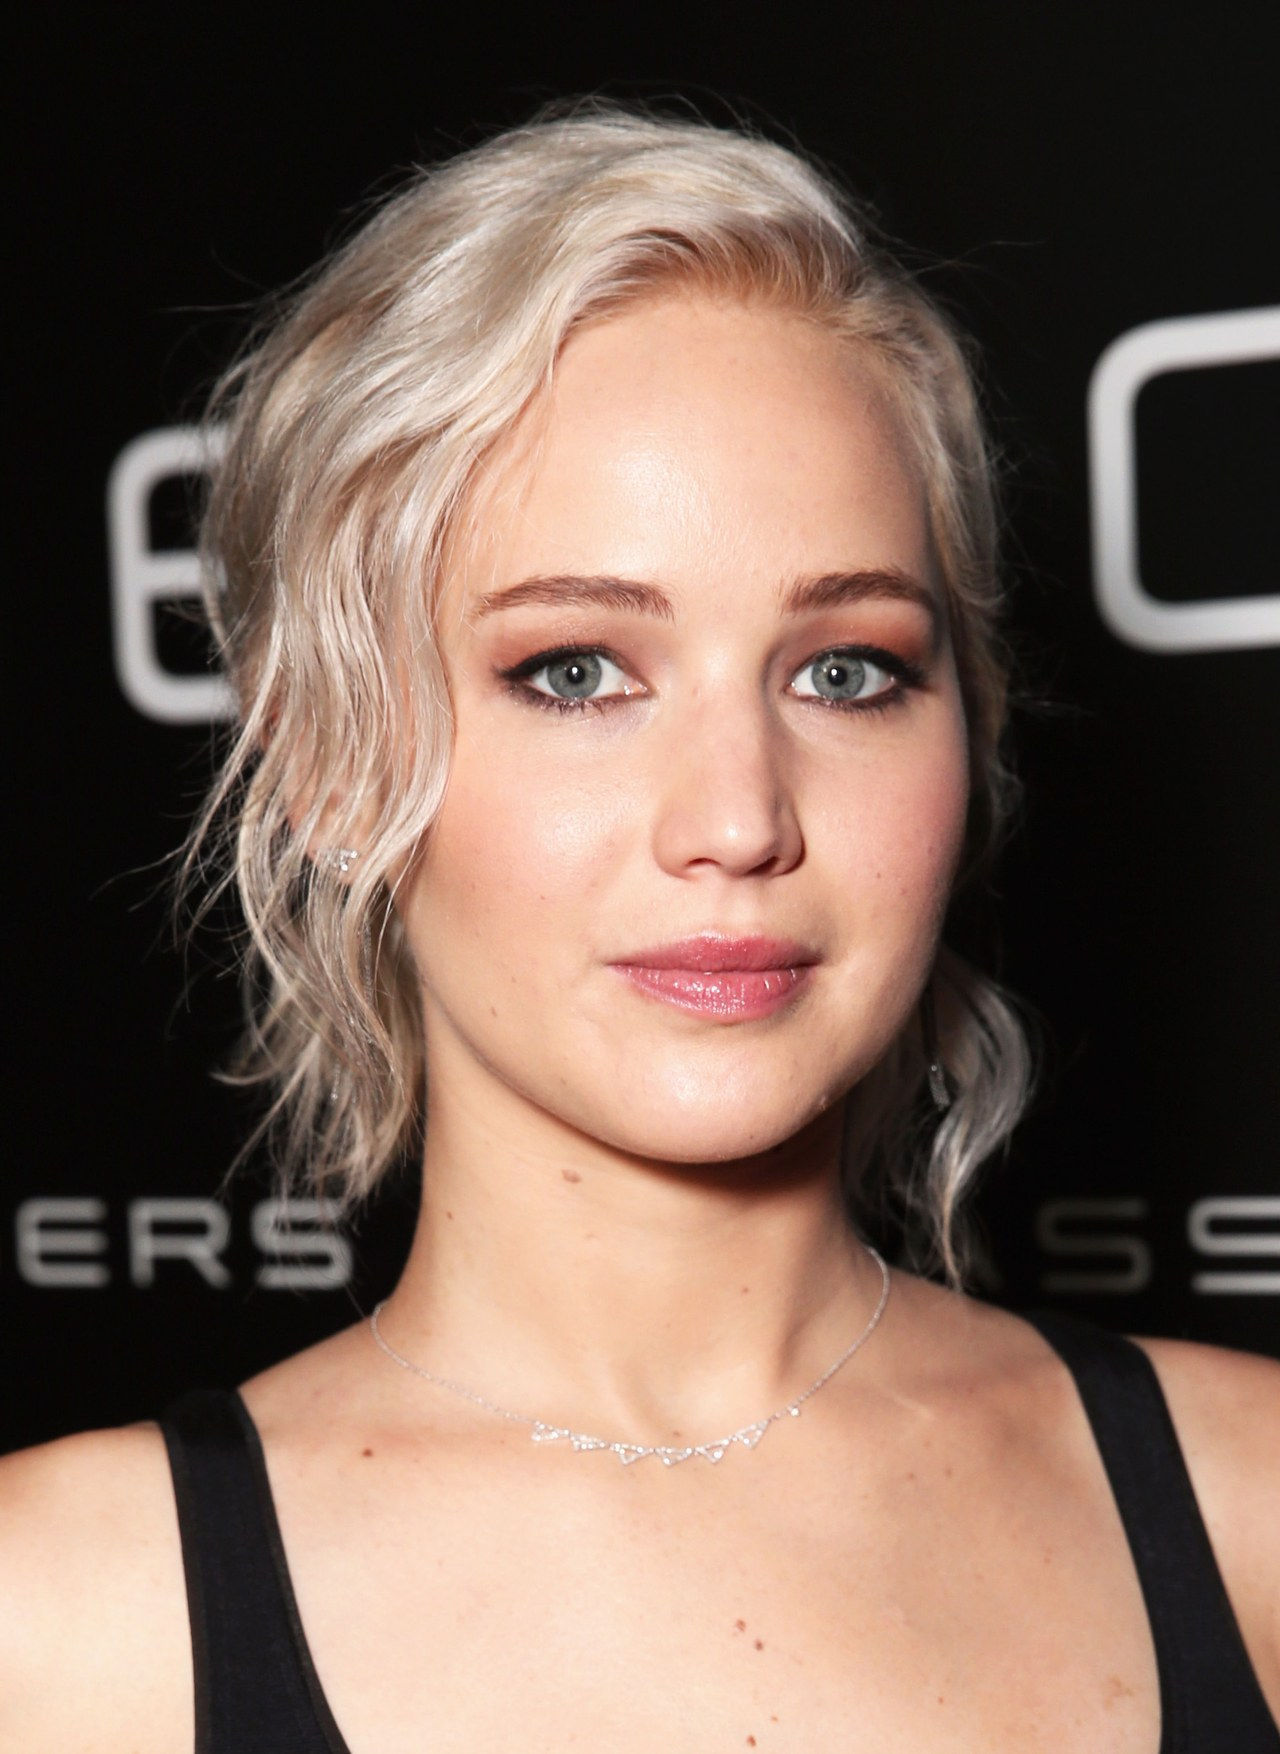 LAS VEGAS, NV - APRIL 12: Actress Jennifer Lawrence attends CinemaCon 2016 An Evening with Sony Pictures Entertainment: Celebrating the Summer of 2016 and Beyond at The Colosseum at Caesars Palace during CinemaCon, the official convention of the National Association of Theatre Owners, on April 12, 2016 in Las Vegas, Nevada. (Photo by Todd Williamson/Getty Images for CinemaCon)